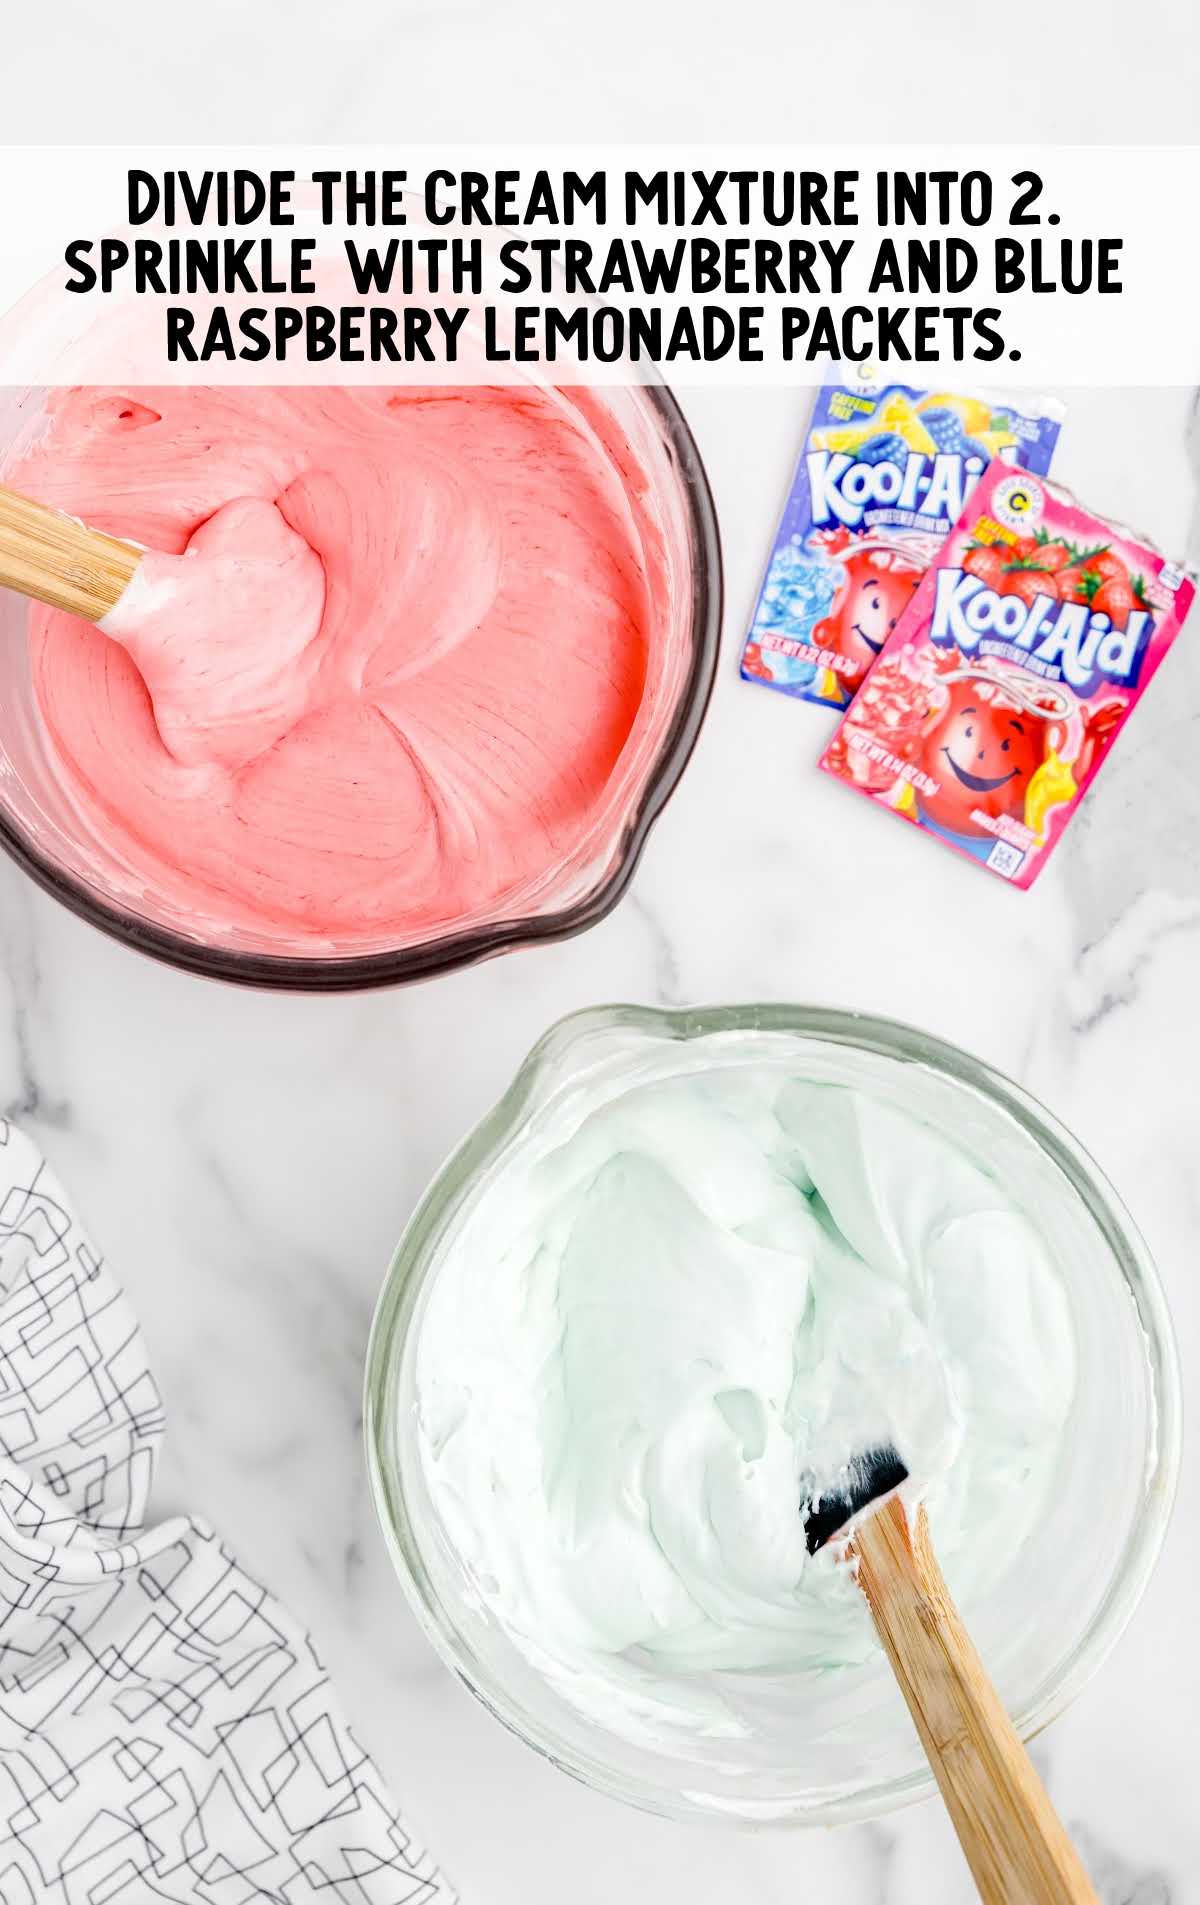 kool aid packets added to the measuring cups of heavy cream mixture